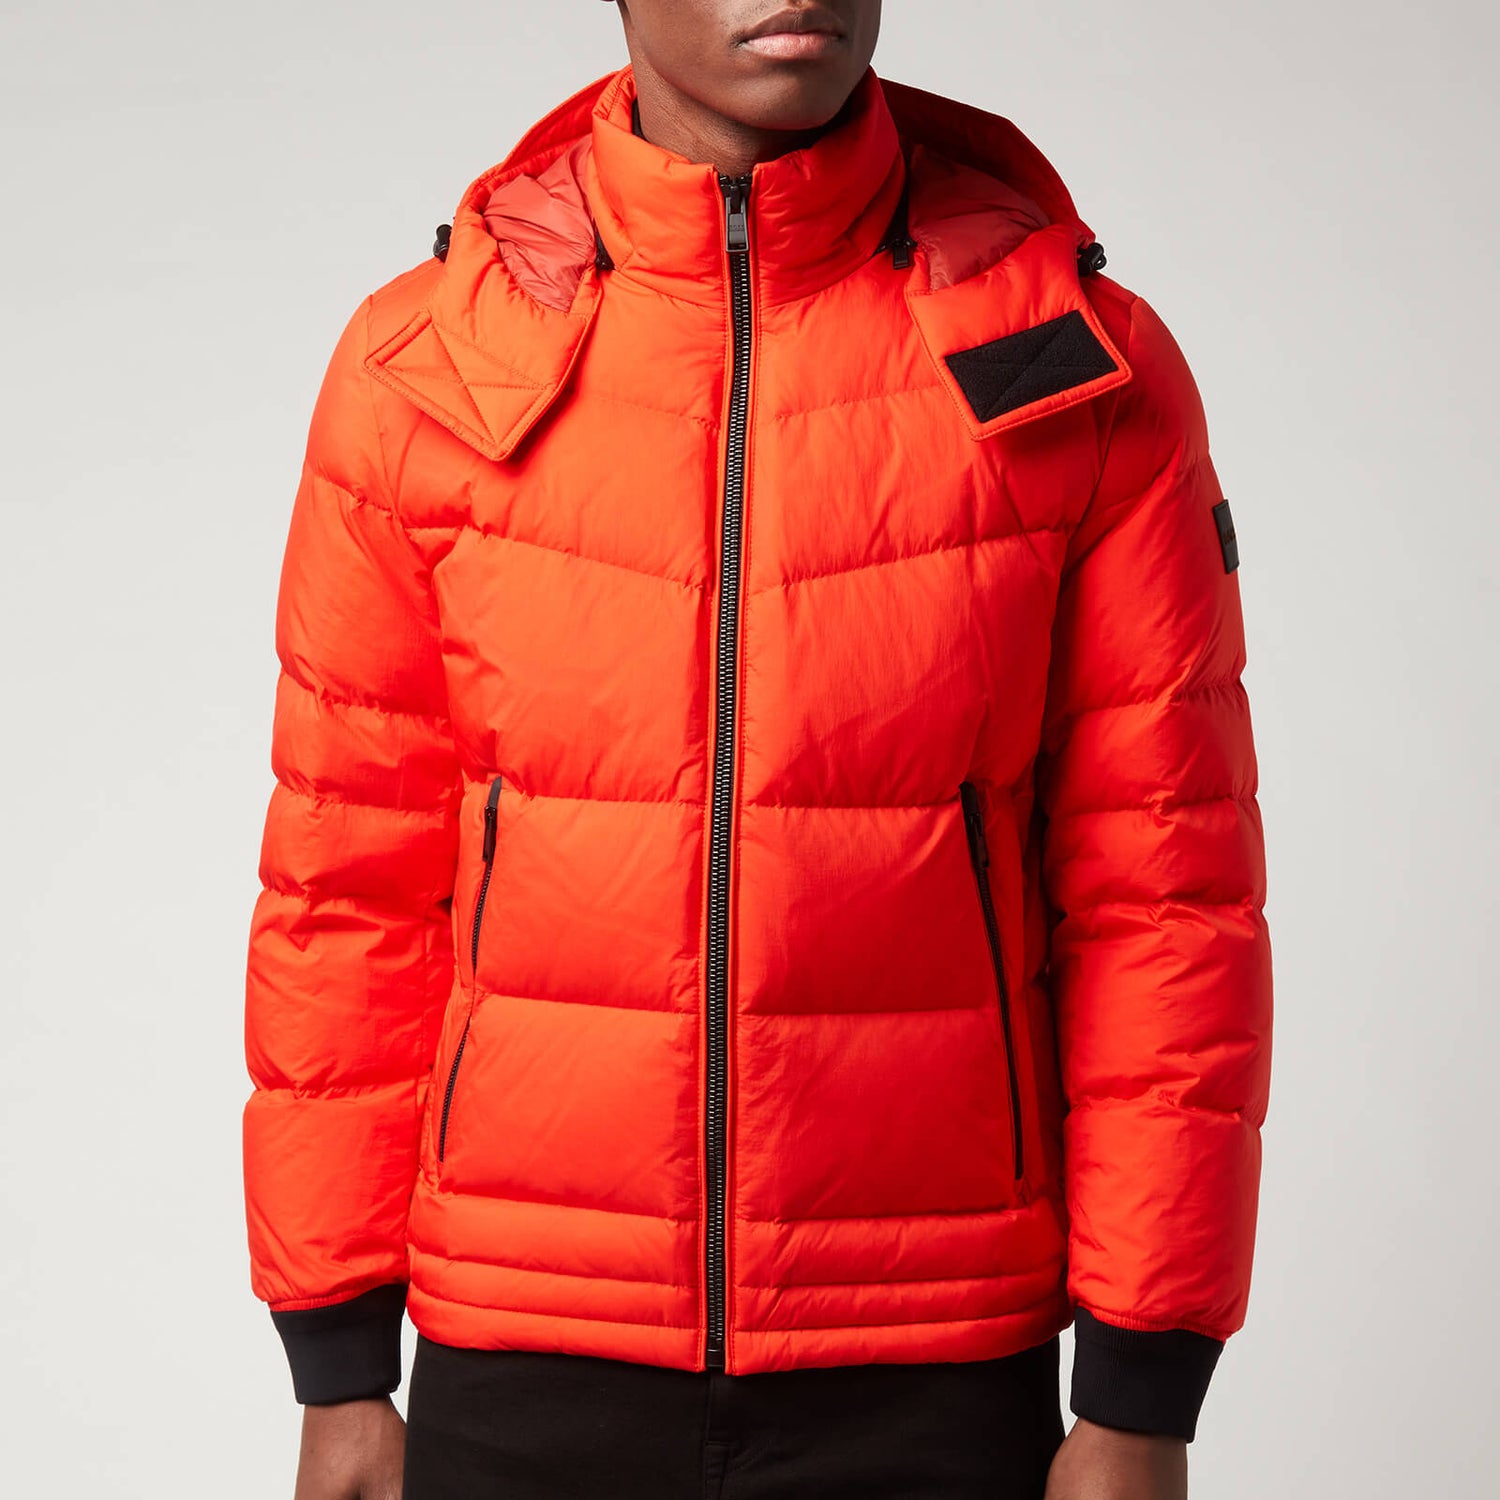 BOSS Casual Men's Out Jacket - Bright Orange - S